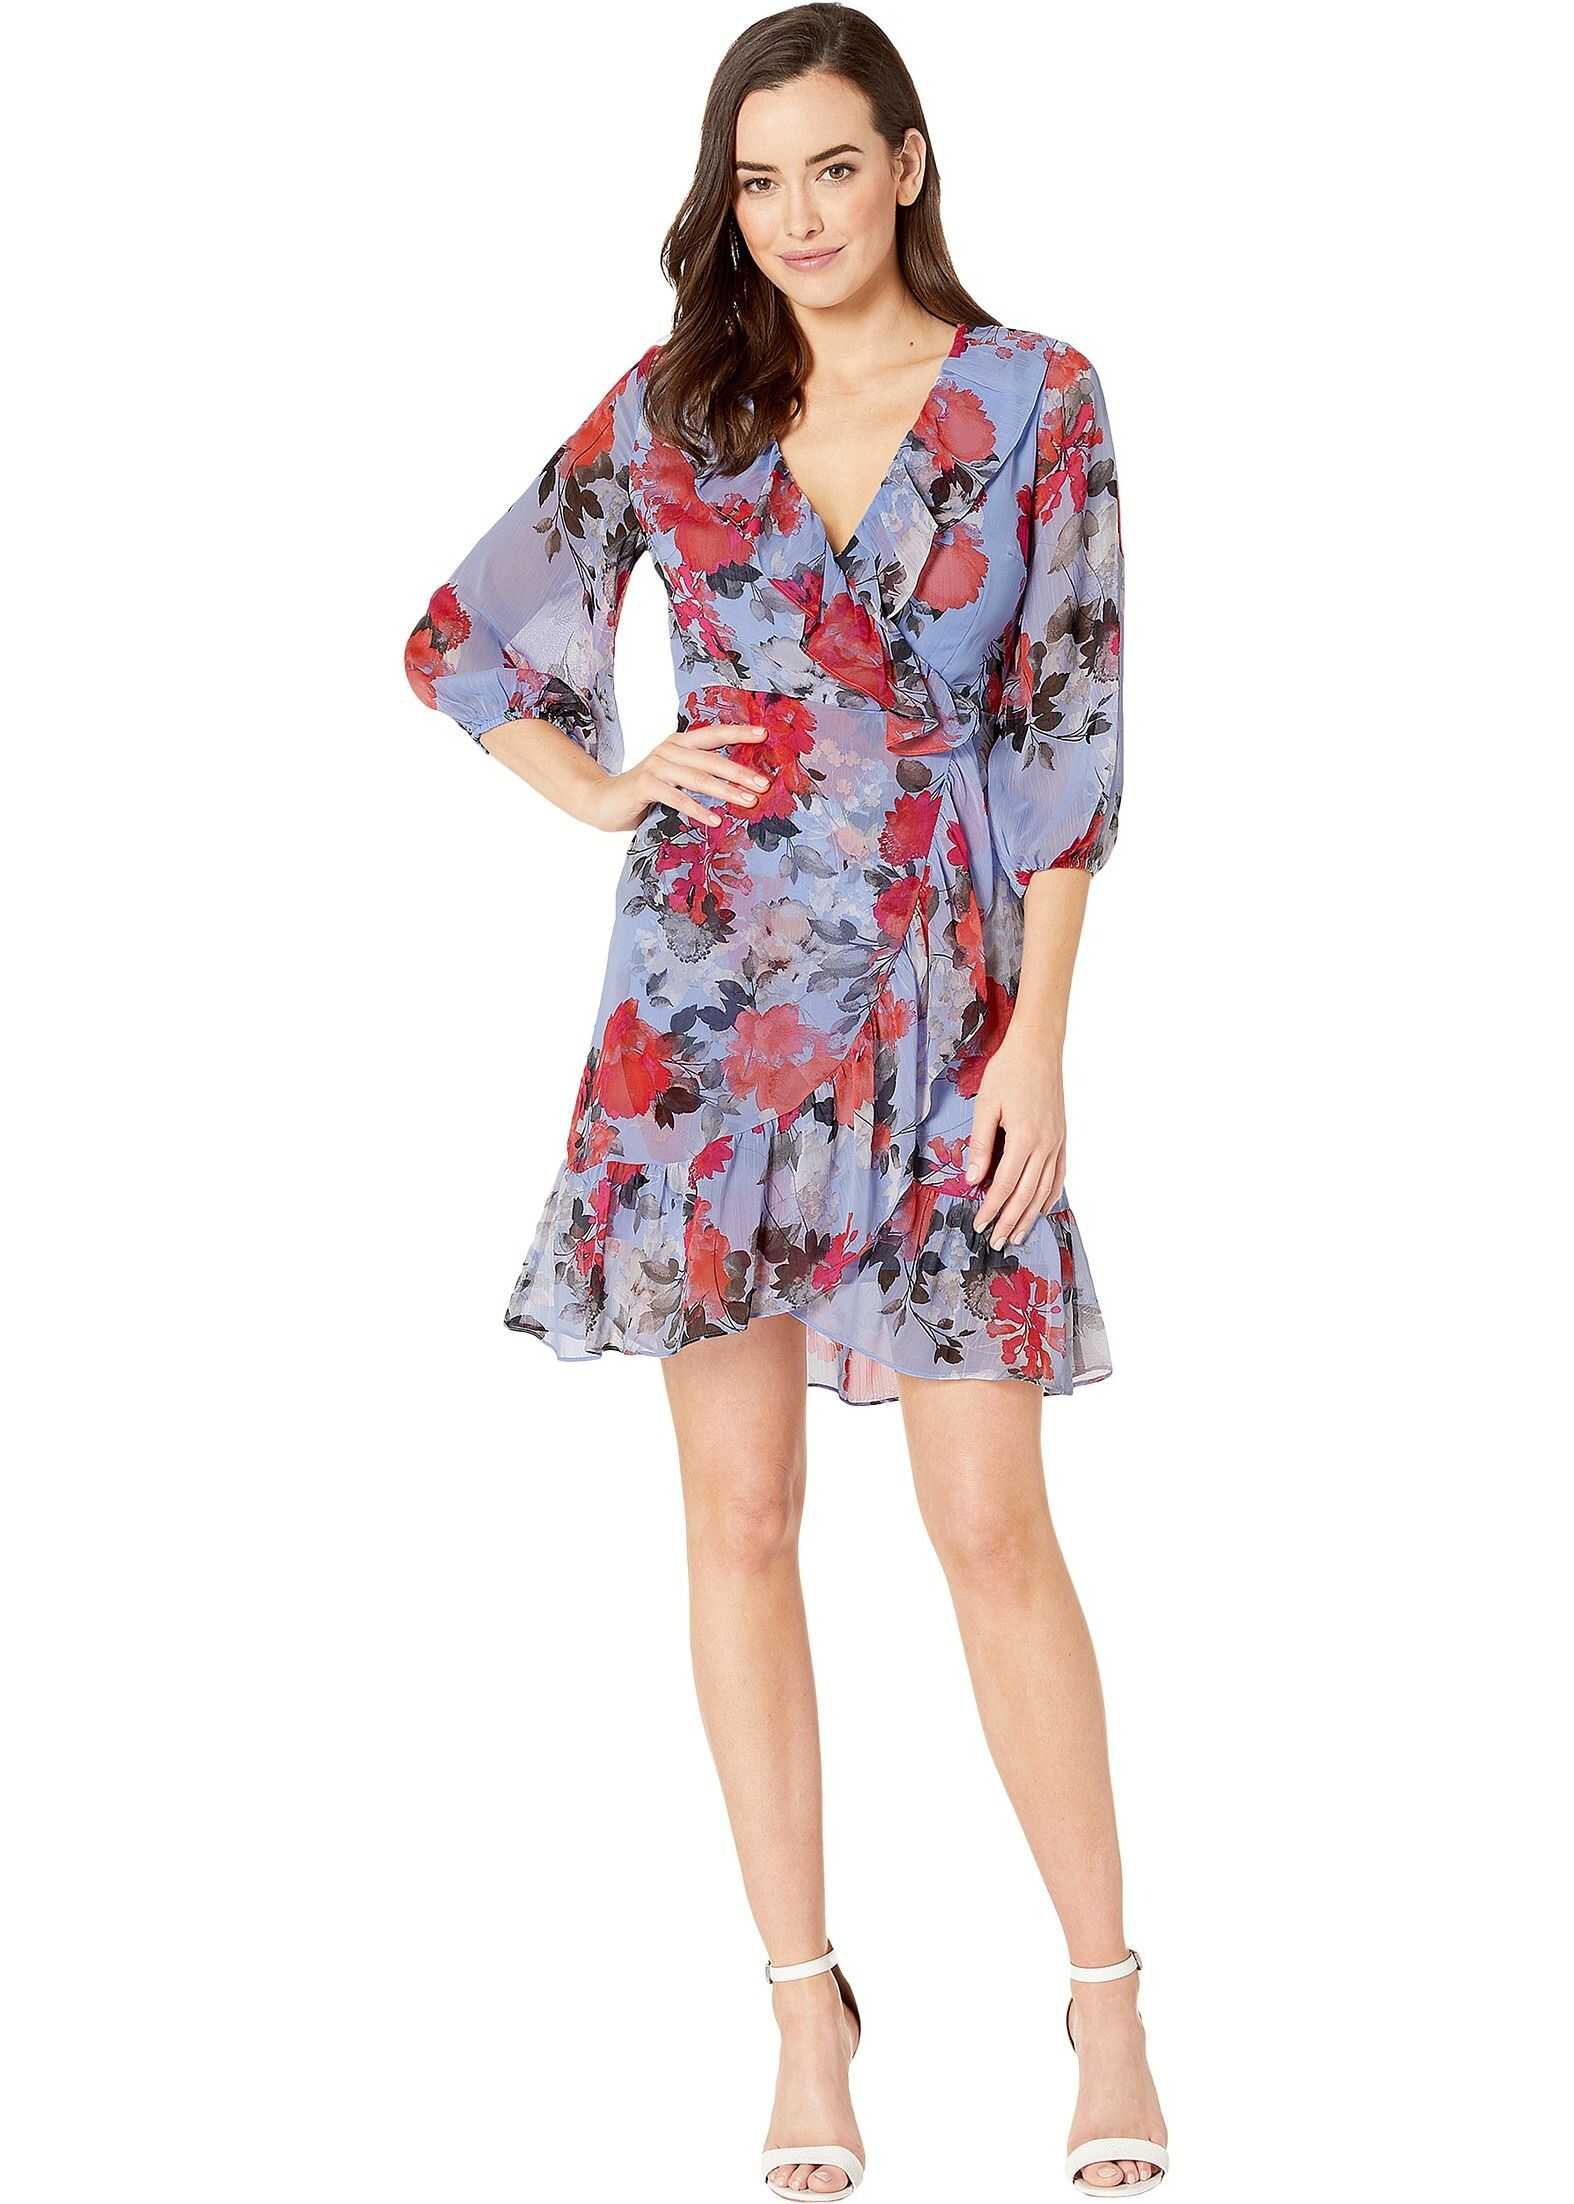 Adrianna Papell Coral Blossoms Faux Wrap Dress Sky Blue Multi